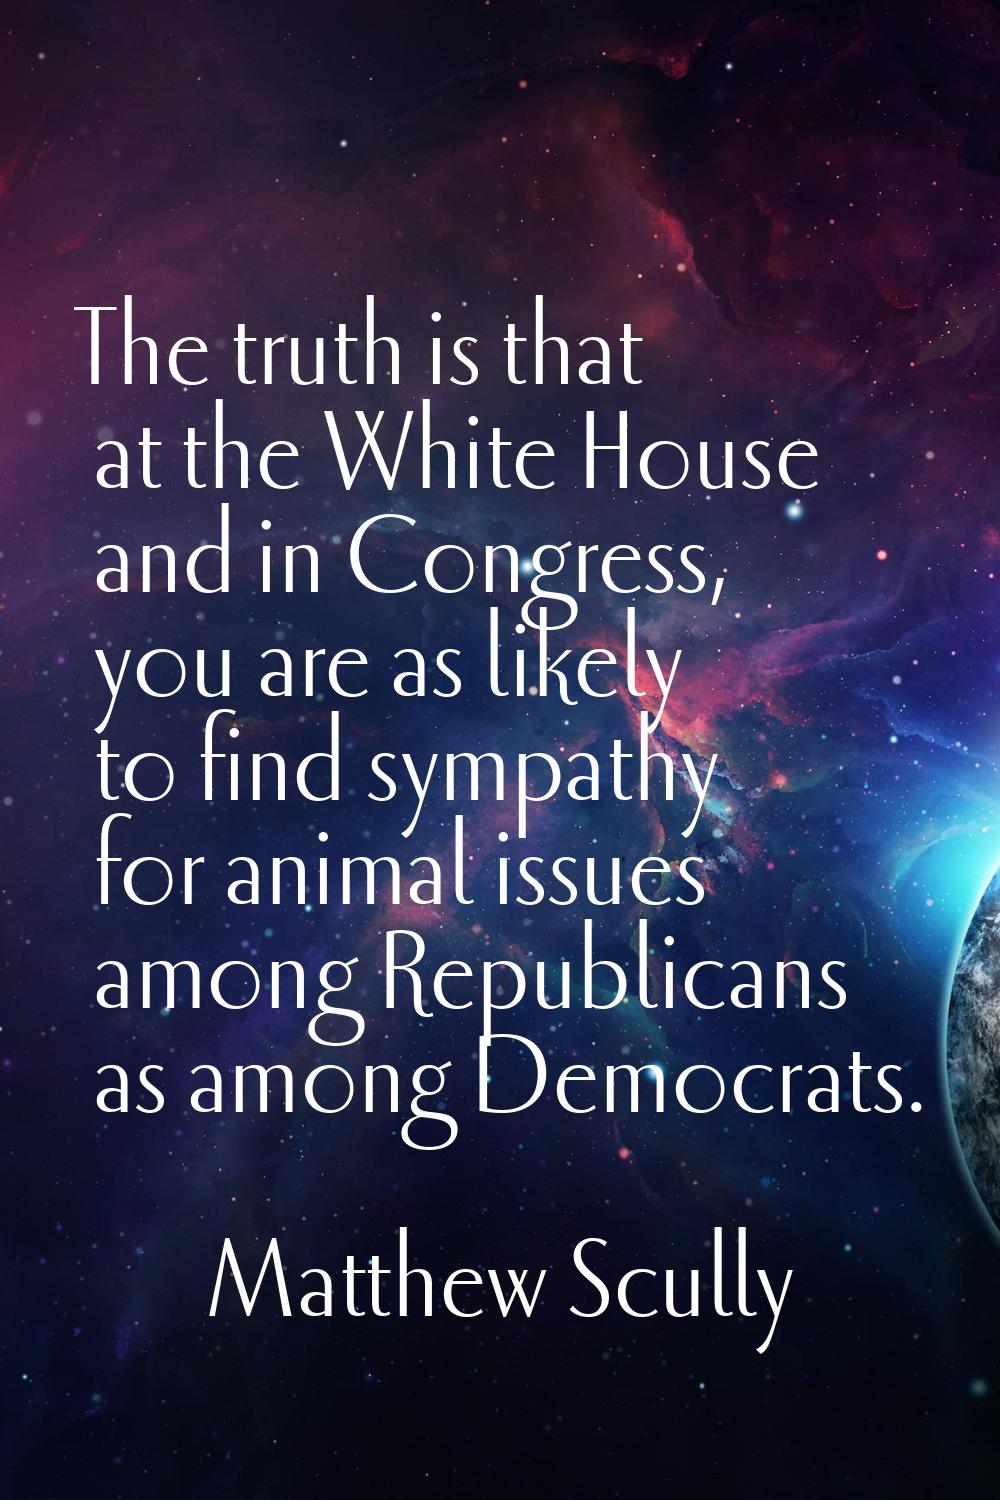 The truth is that at the White House and in Congress, you are as likely to find sympathy for animal